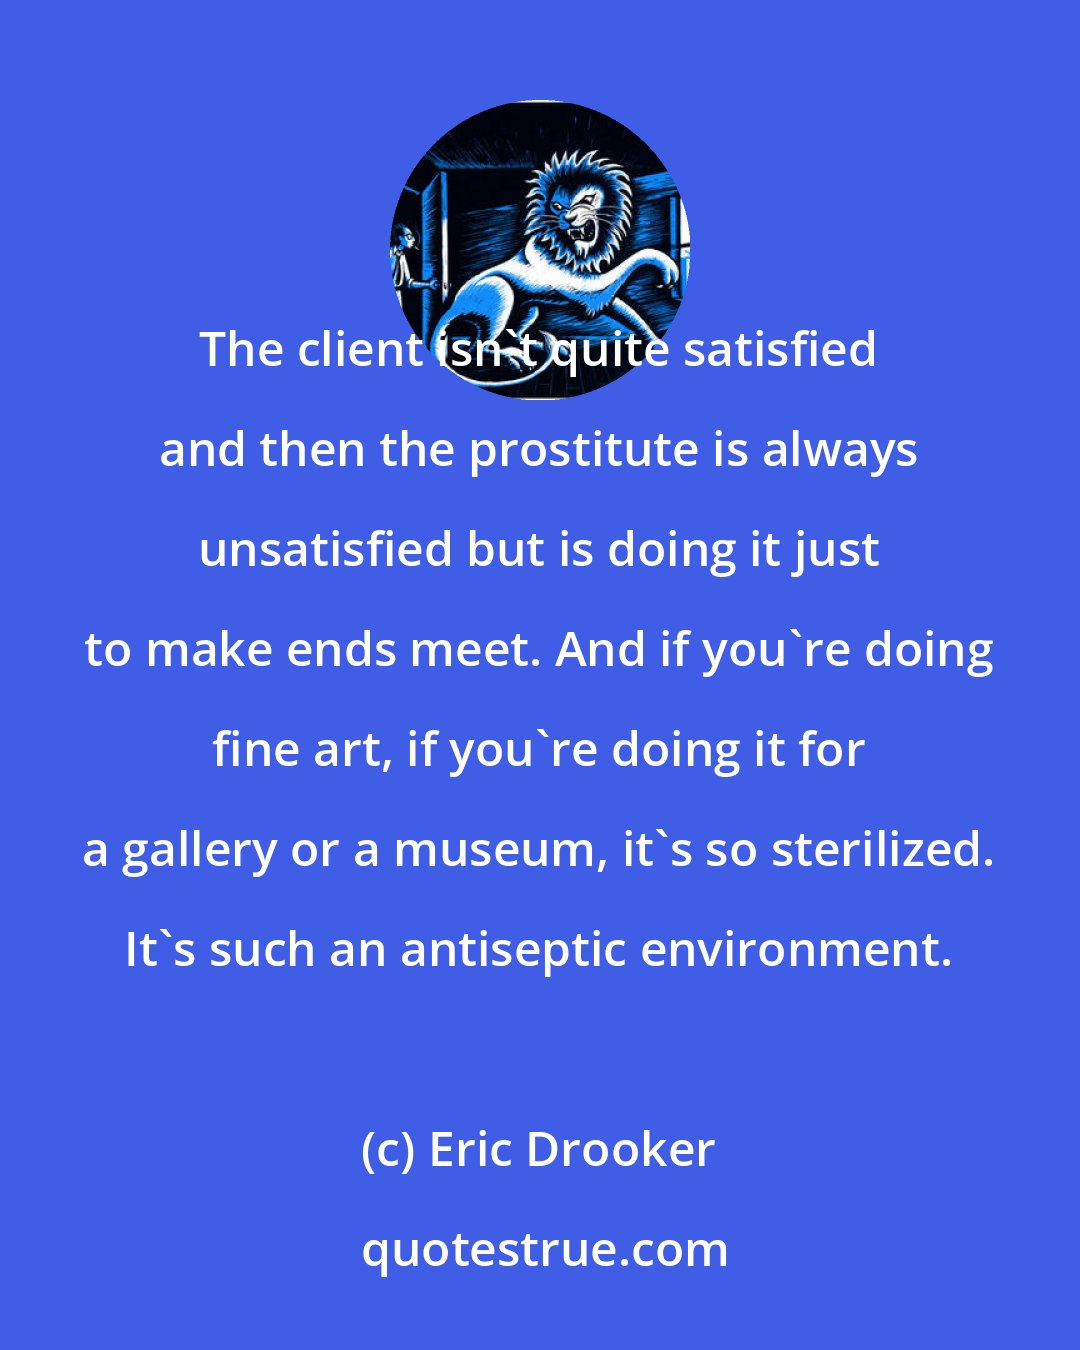 Eric Drooker: The client isn't quite satisfied and then the prostitute is always unsatisfied but is doing it just to make ends meet. And if you're doing fine art, if you're doing it for a gallery or a museum, it's so sterilized. It's such an antiseptic environment.